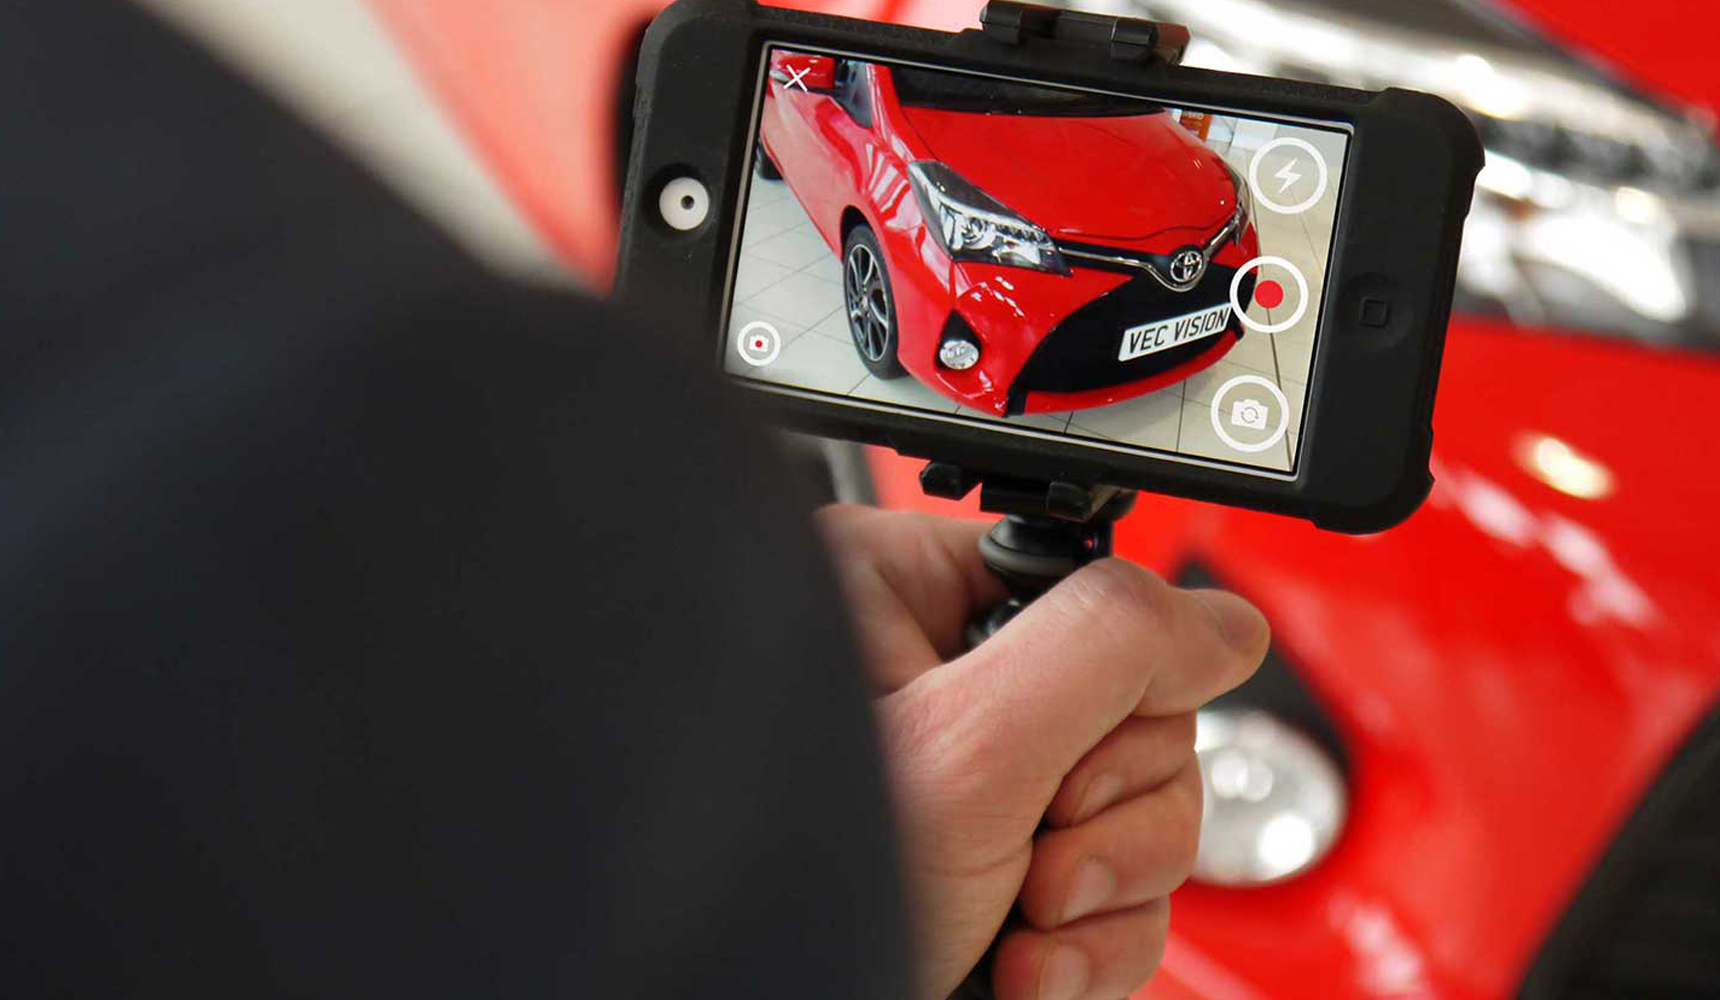 Close up of person holding a mobile phone taking imagery of the front of a red vehicle